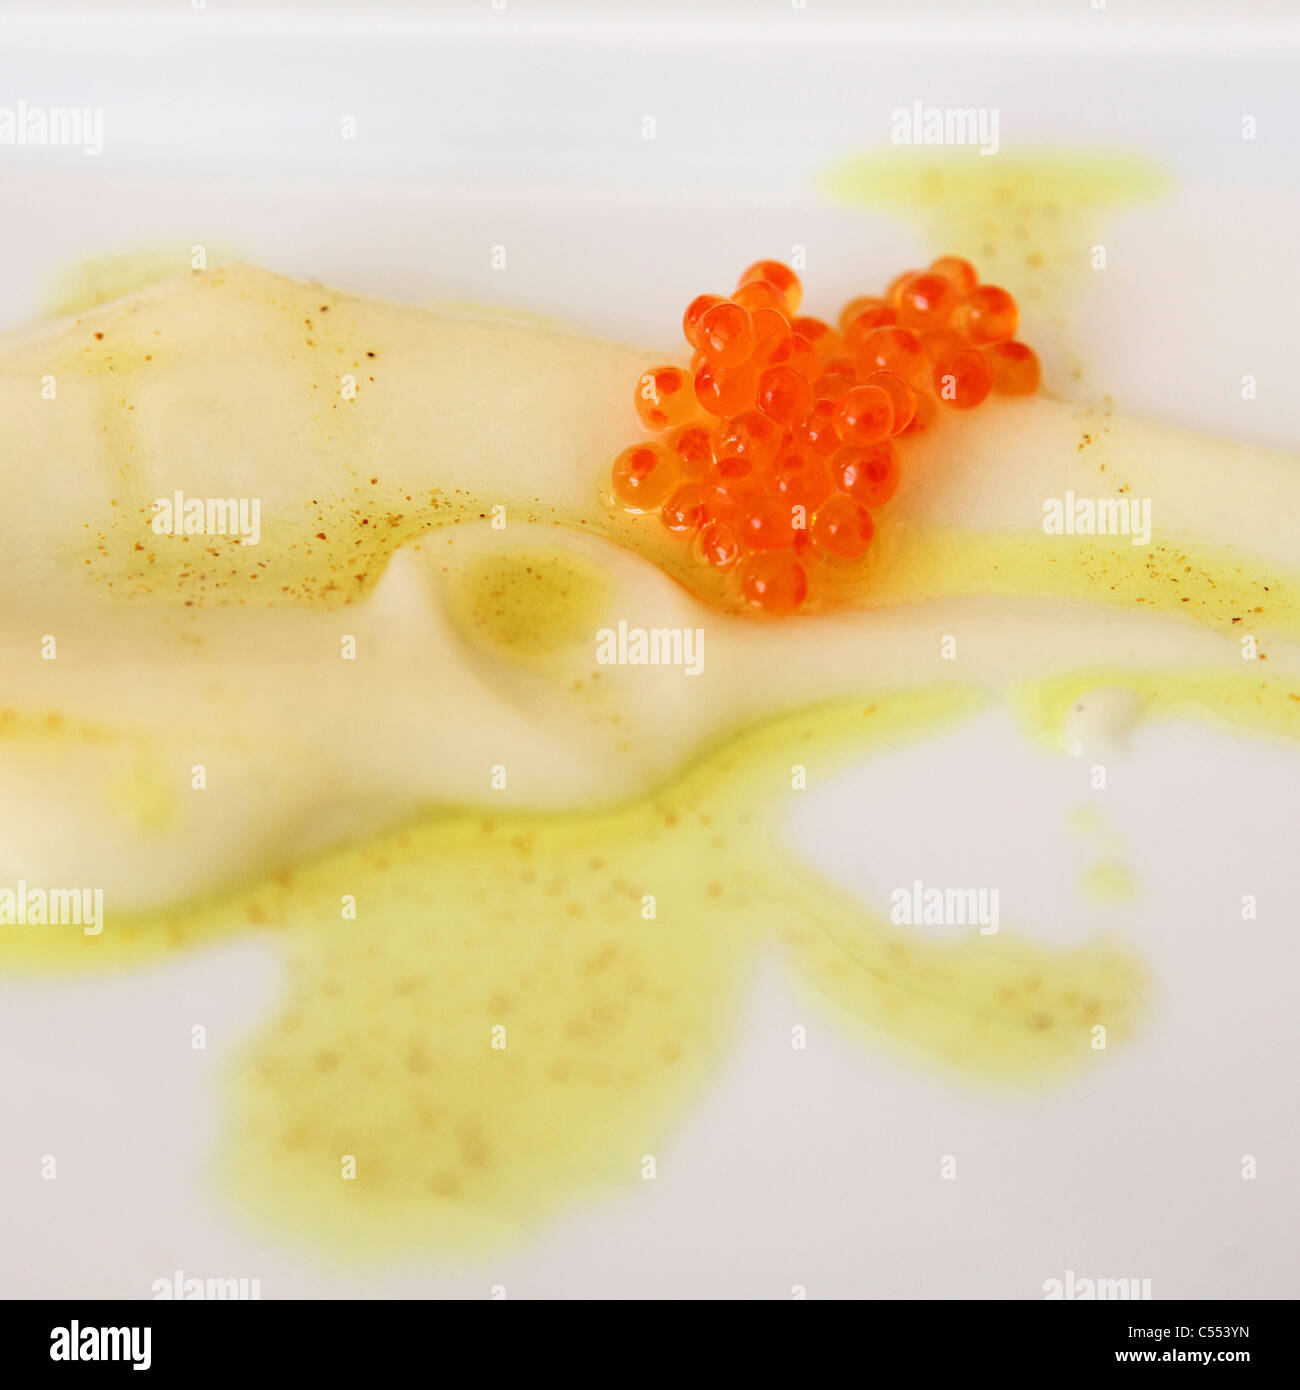 Cream of cauliflower is served with salmon roe and spiced olive oil. Stock Photo